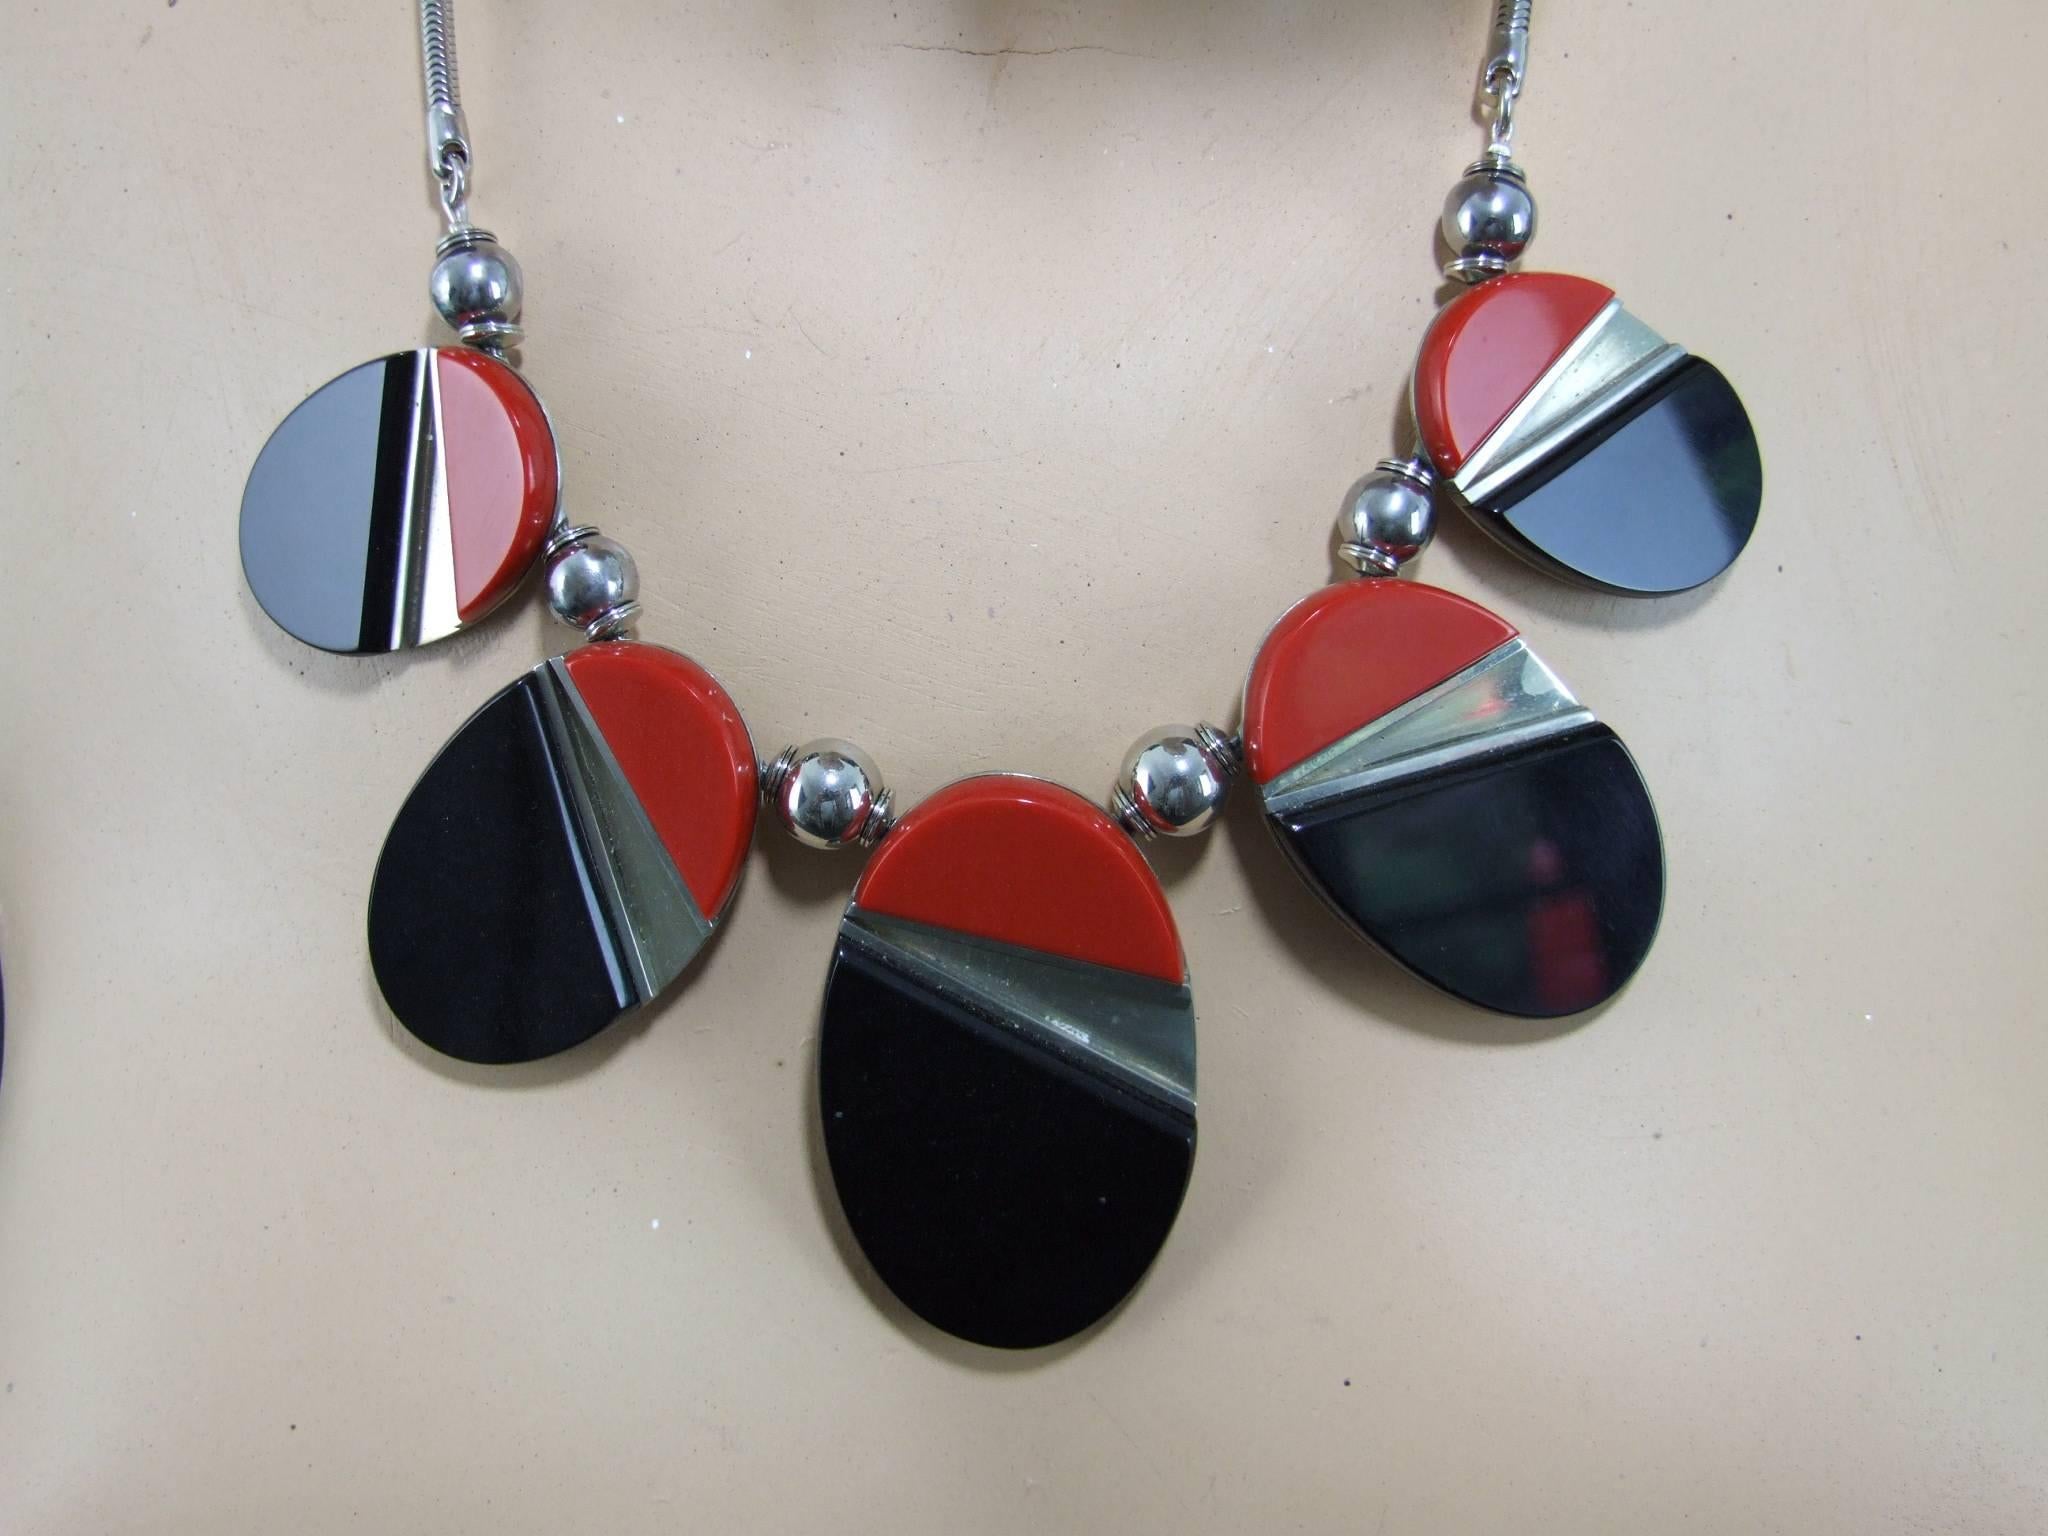 Large modernist red and black galalith and chromed metal necklace by Jakob Bengal. The central panel measures a late 2.5 inches high by 1.5 inches wide (6.5cm x 4cm). The total length from clasp to clasp is 19.5 inches (50cm). Condition is very good